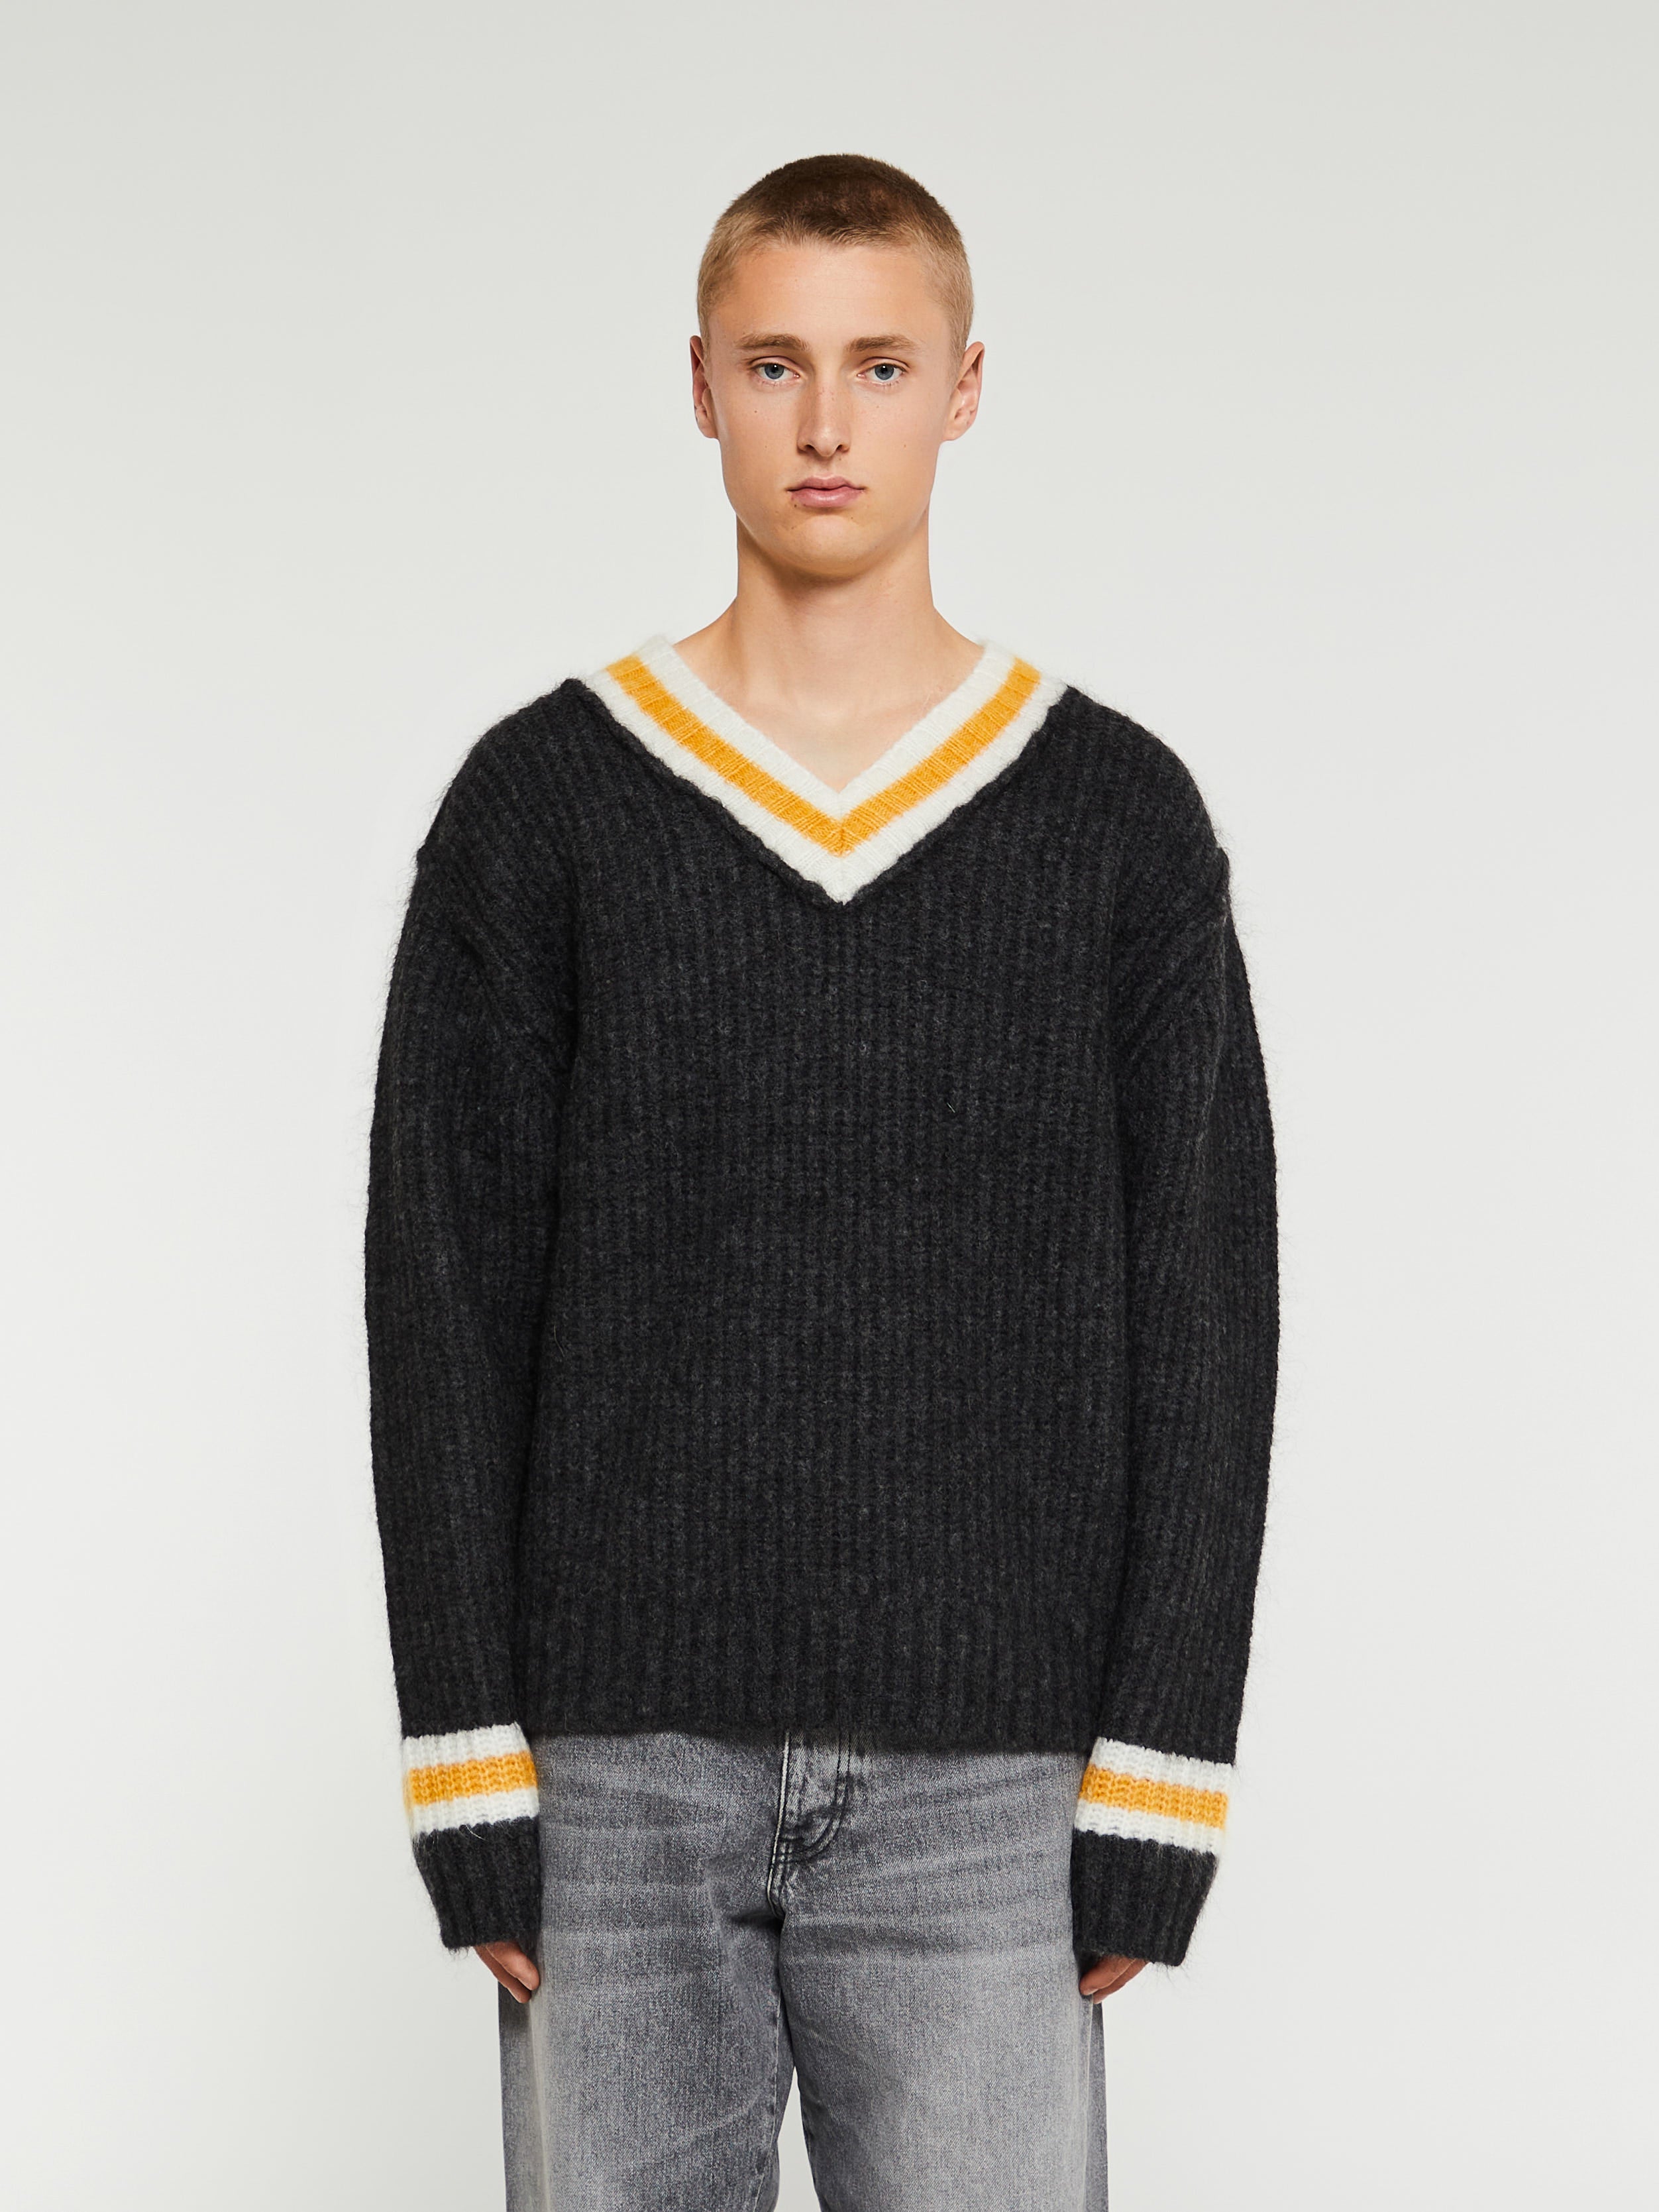 Mohair Tennis Sweater in Charcoal